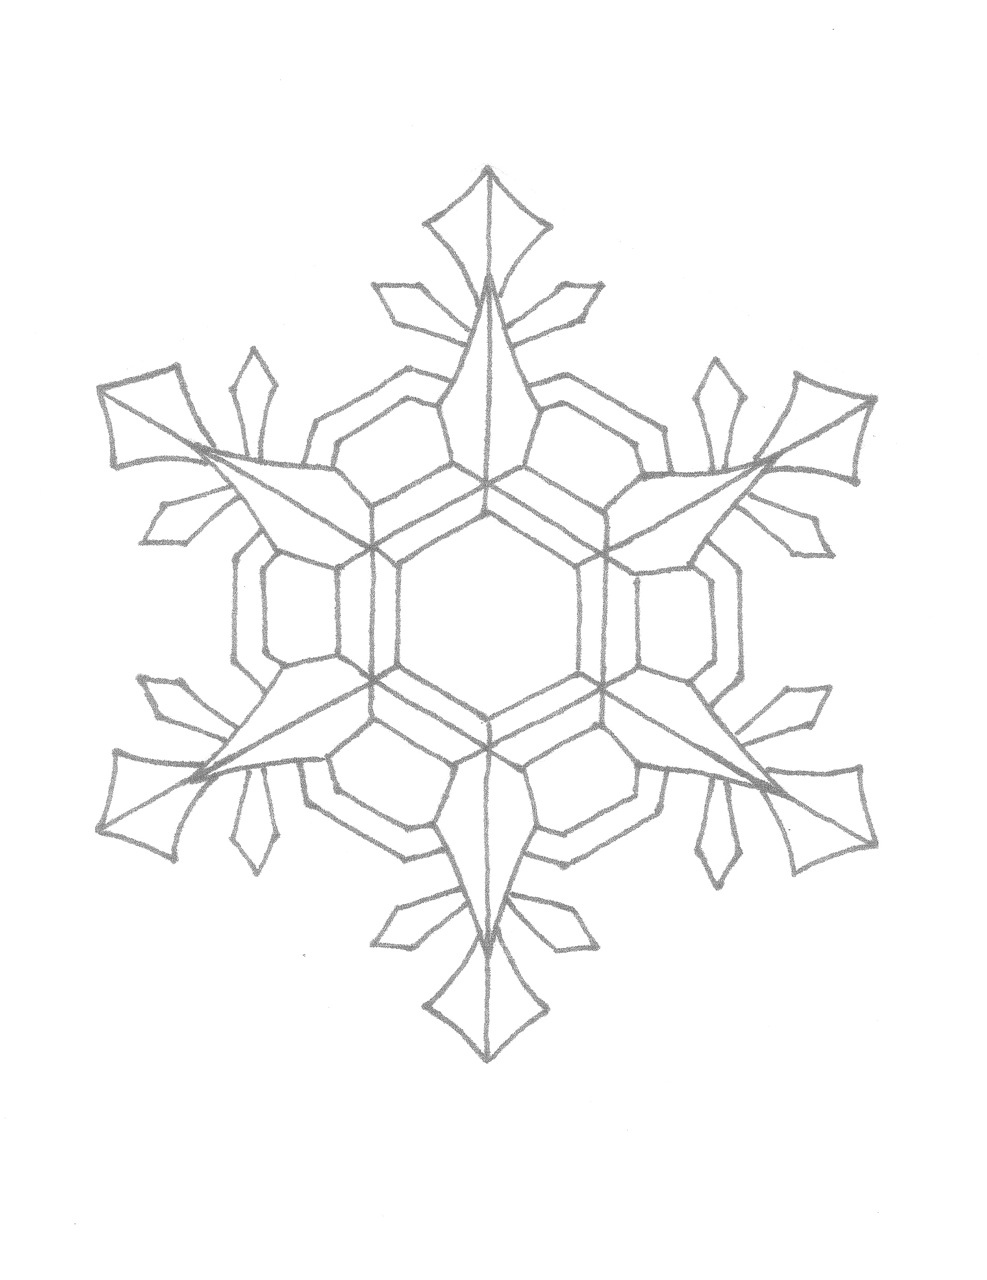 FREE! - Small Snowflake Colouring Page